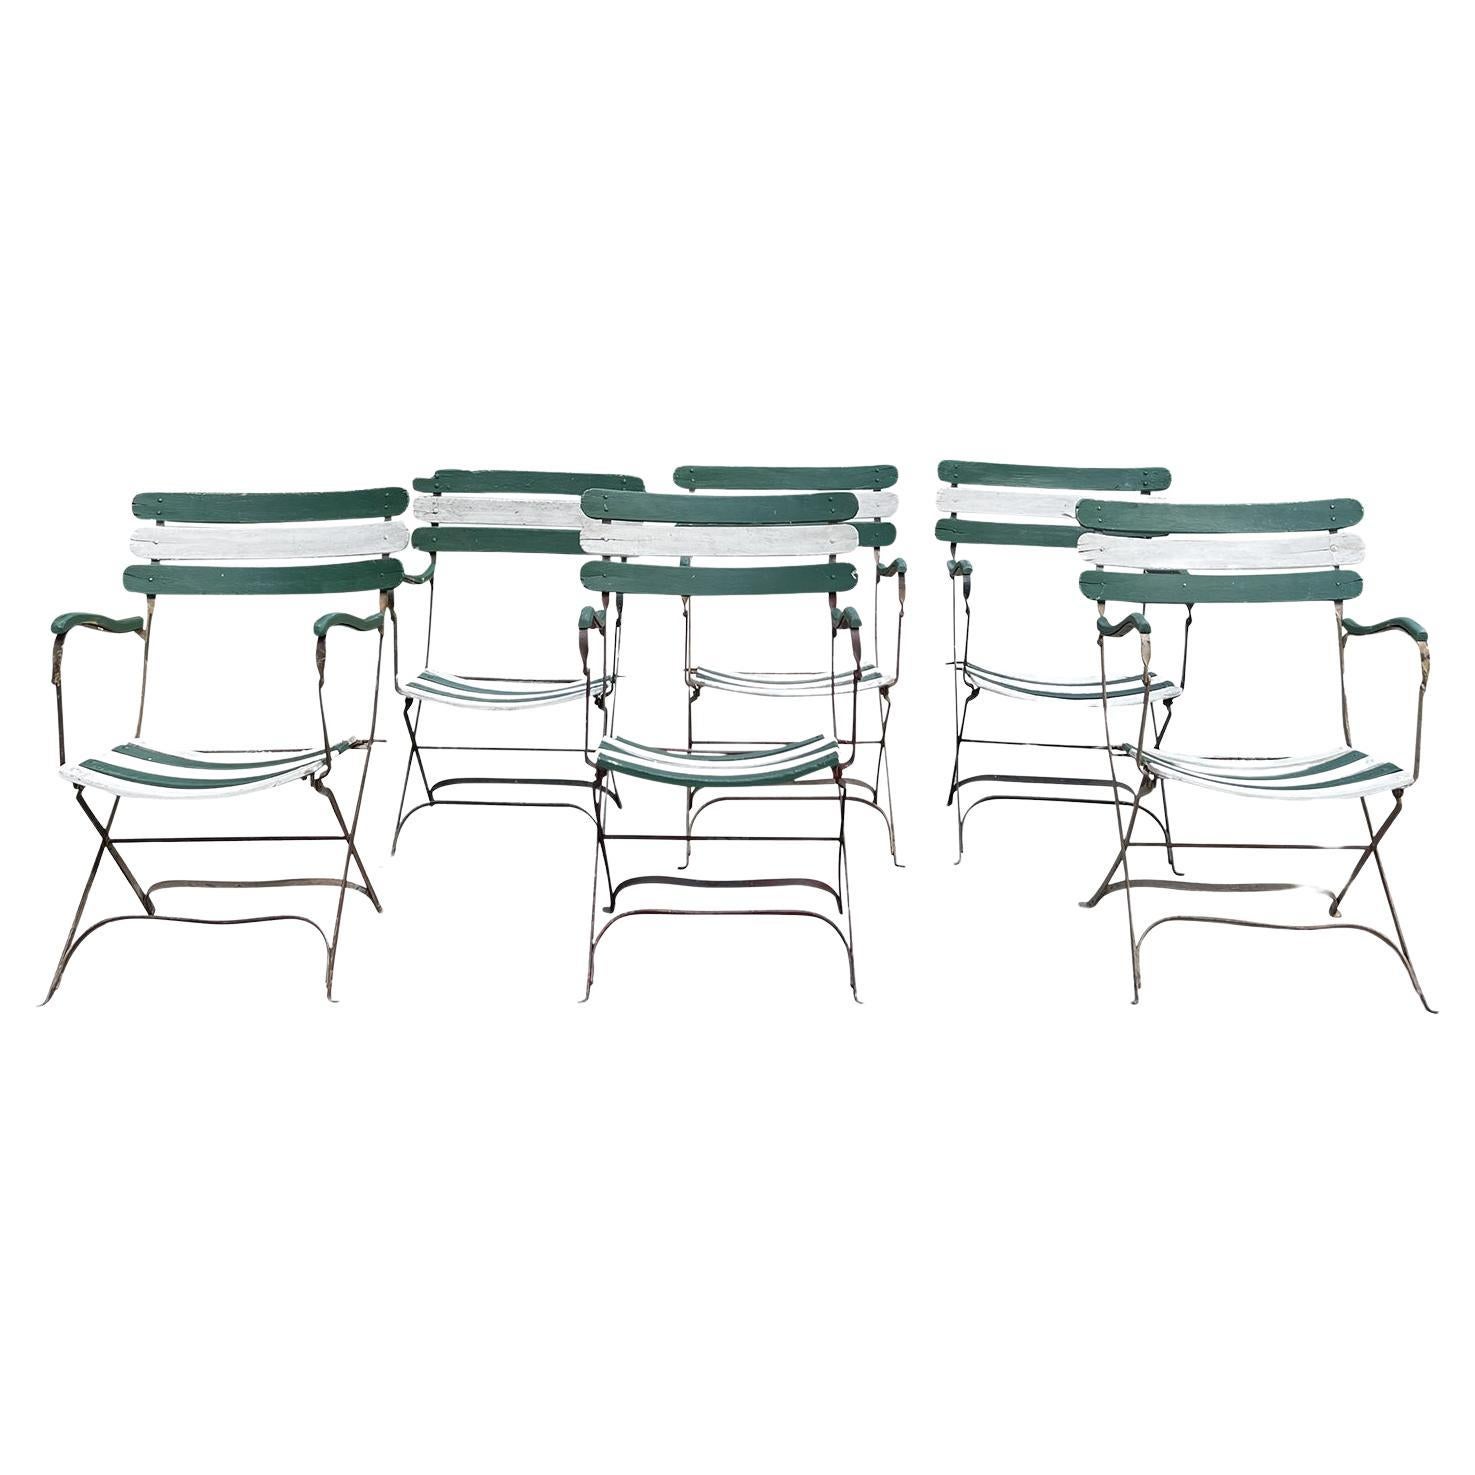 19th - 20th Century French Set of Six Antique Wrought Iron Garden Chairs For Sale